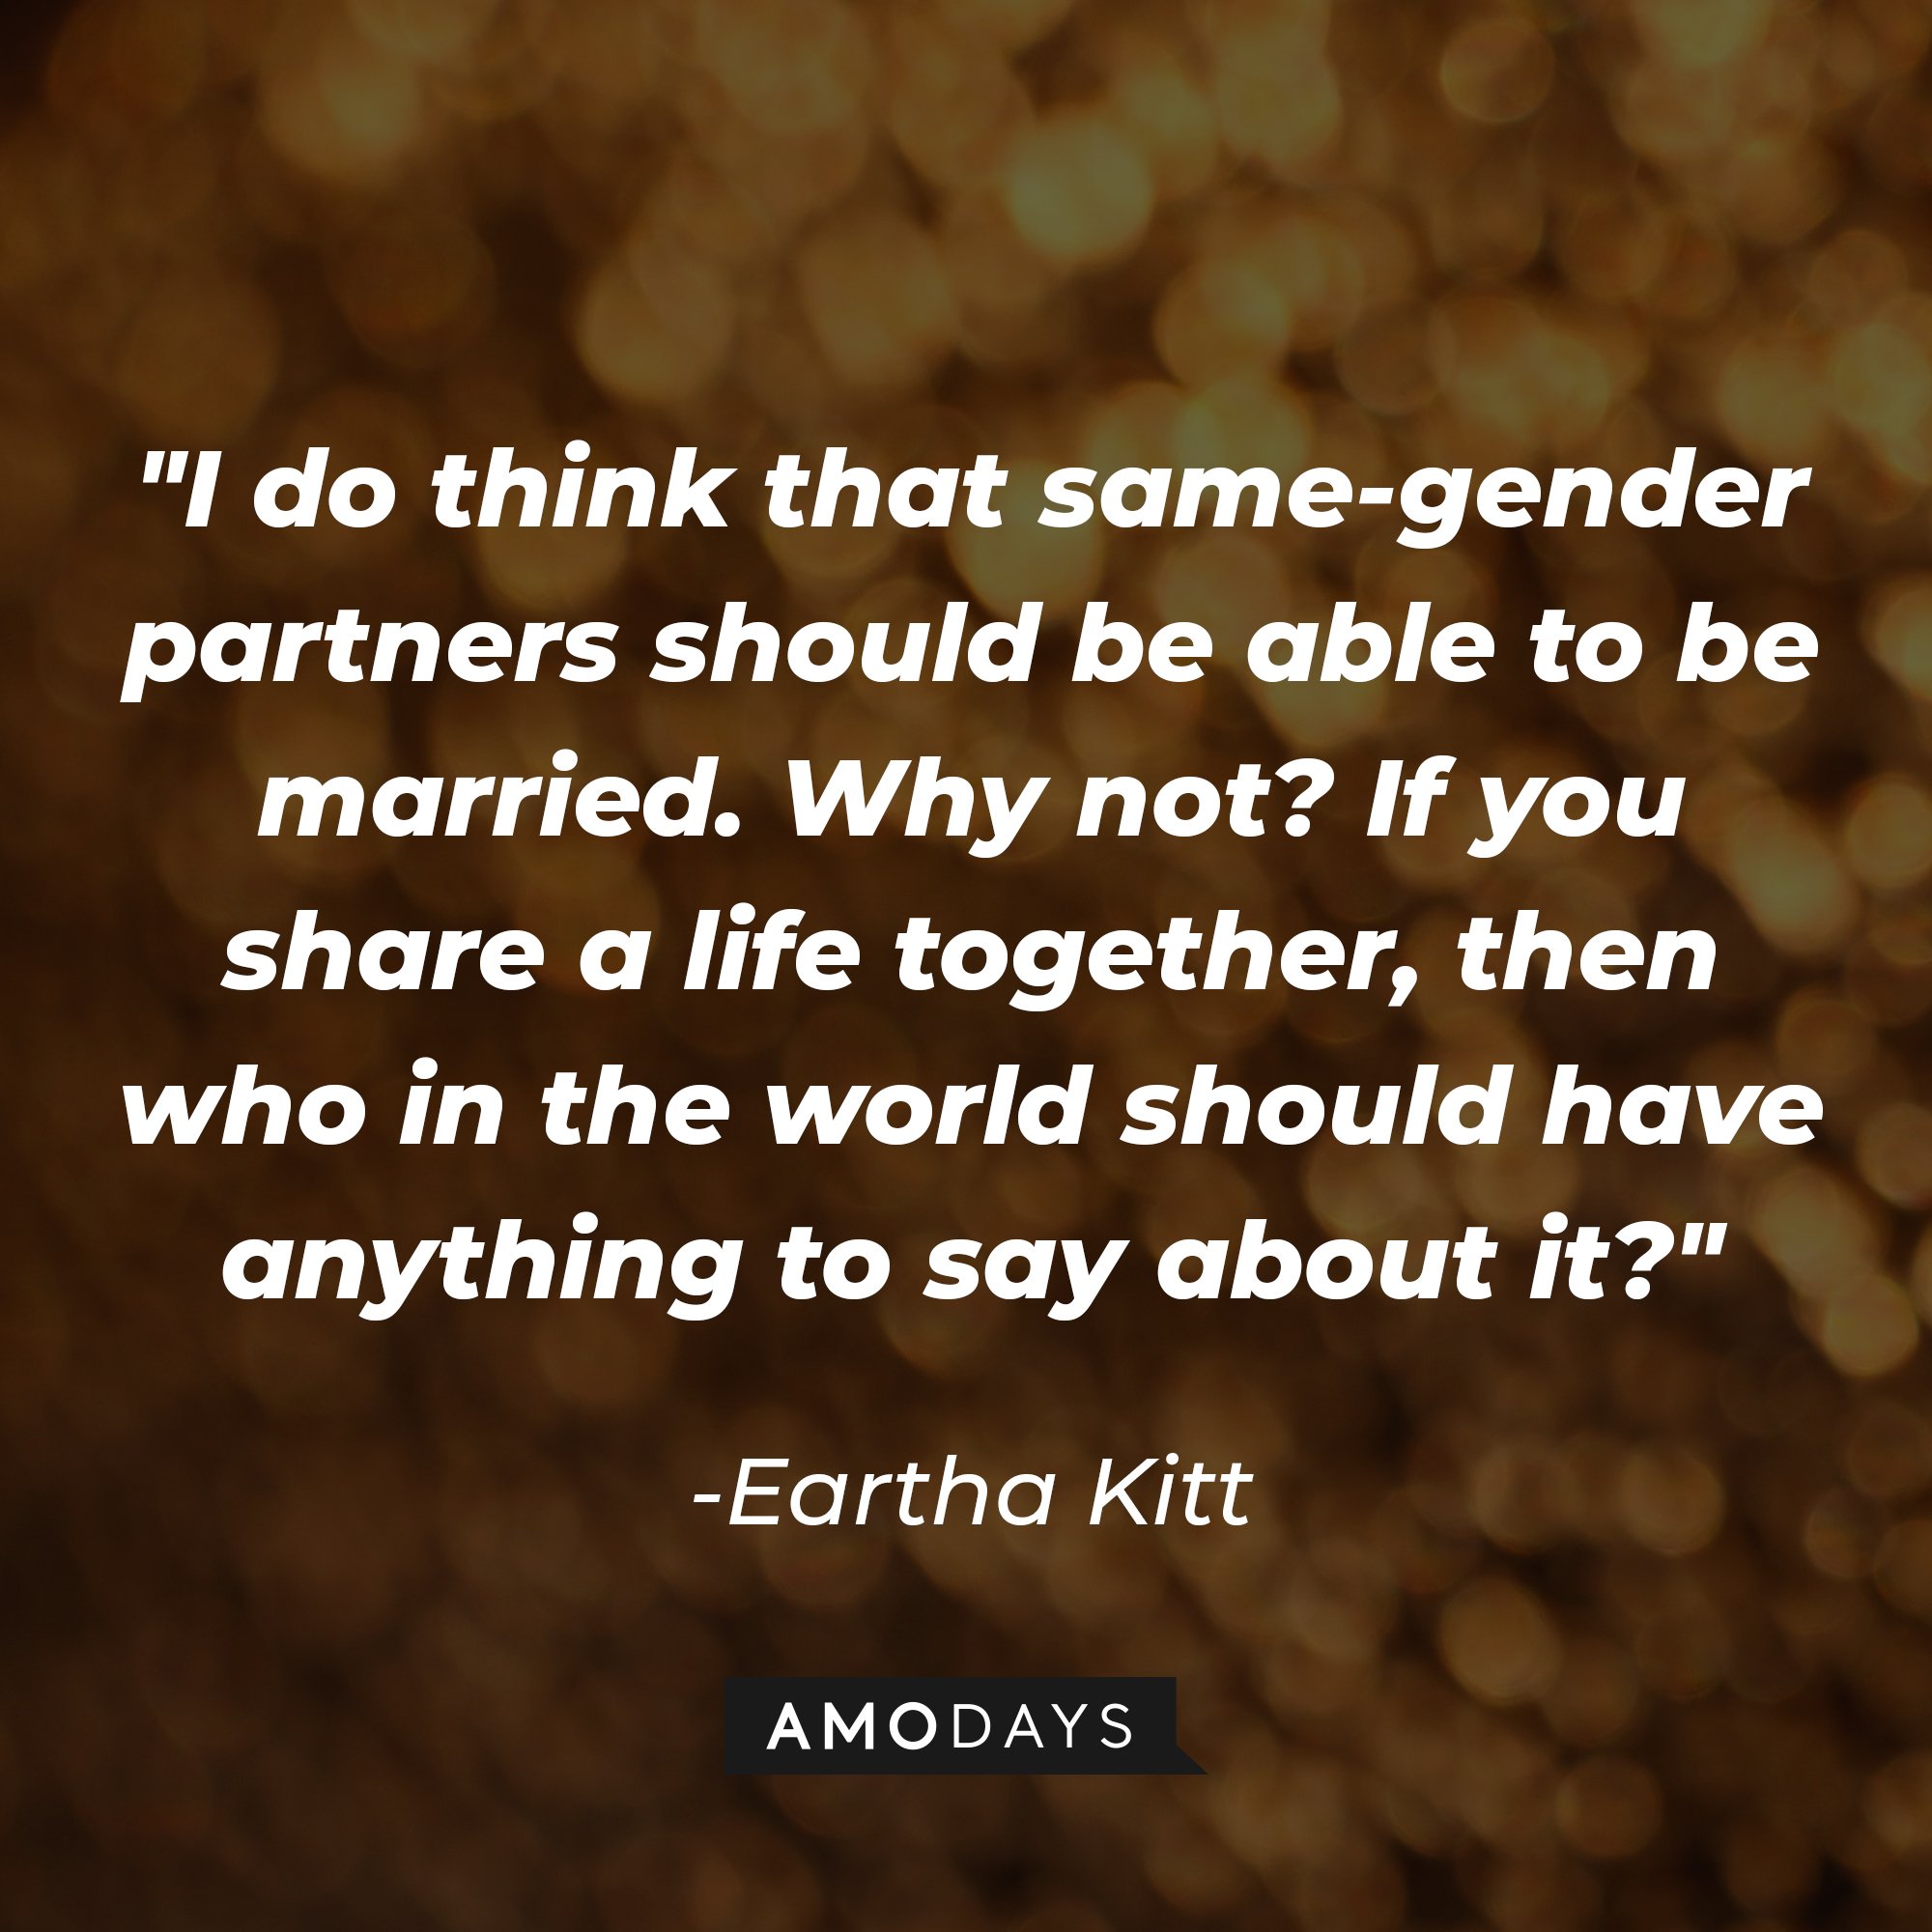 Eartha Kitt’s quote: "I do think that same-gender partners should be able to be married. Why not? If you share a life together, then who in the world should have anything to say about it?"  | Image: AmoDays